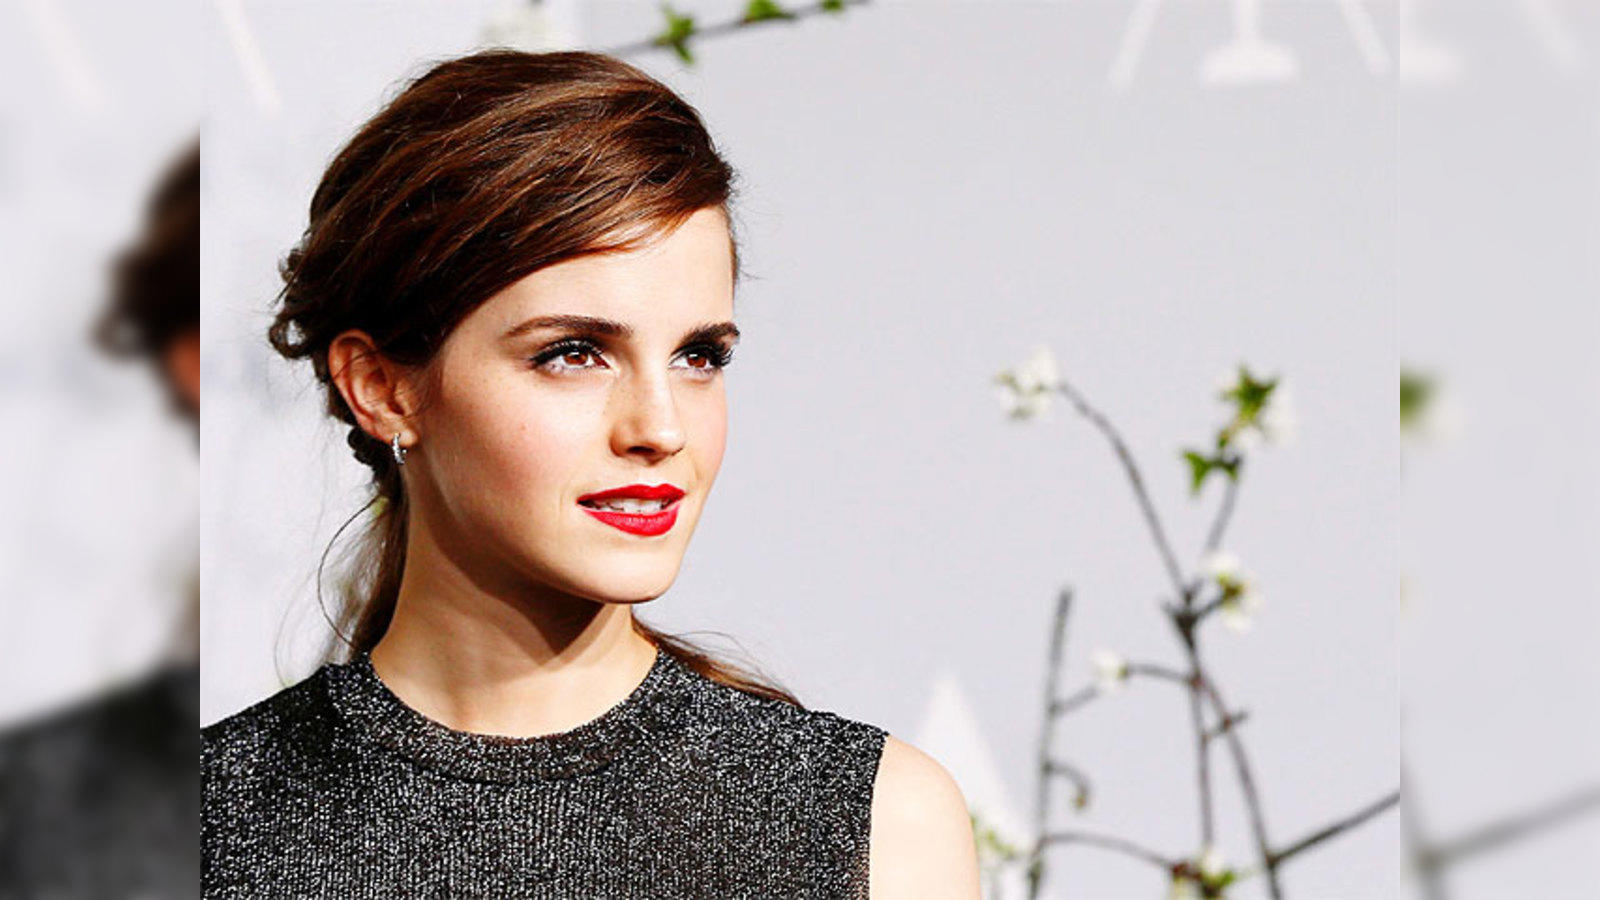 Hacker threatens to leak Emma Watson's nude pictures - The Economic Times